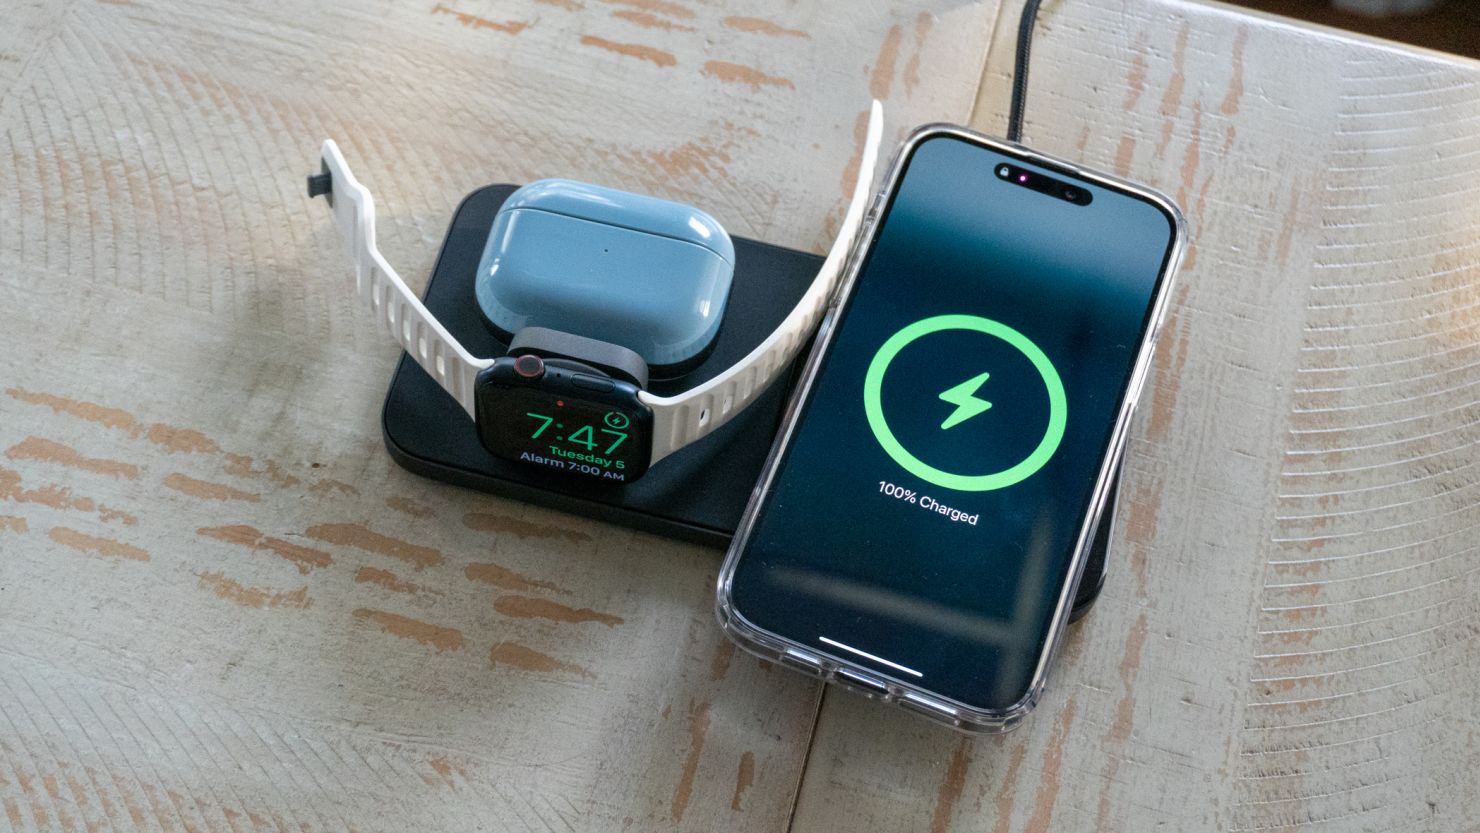 3 in 1 Apple Wireless Charging Station, MagSafe Charger for Apple iPhone, Apple  Watch, and AirPods